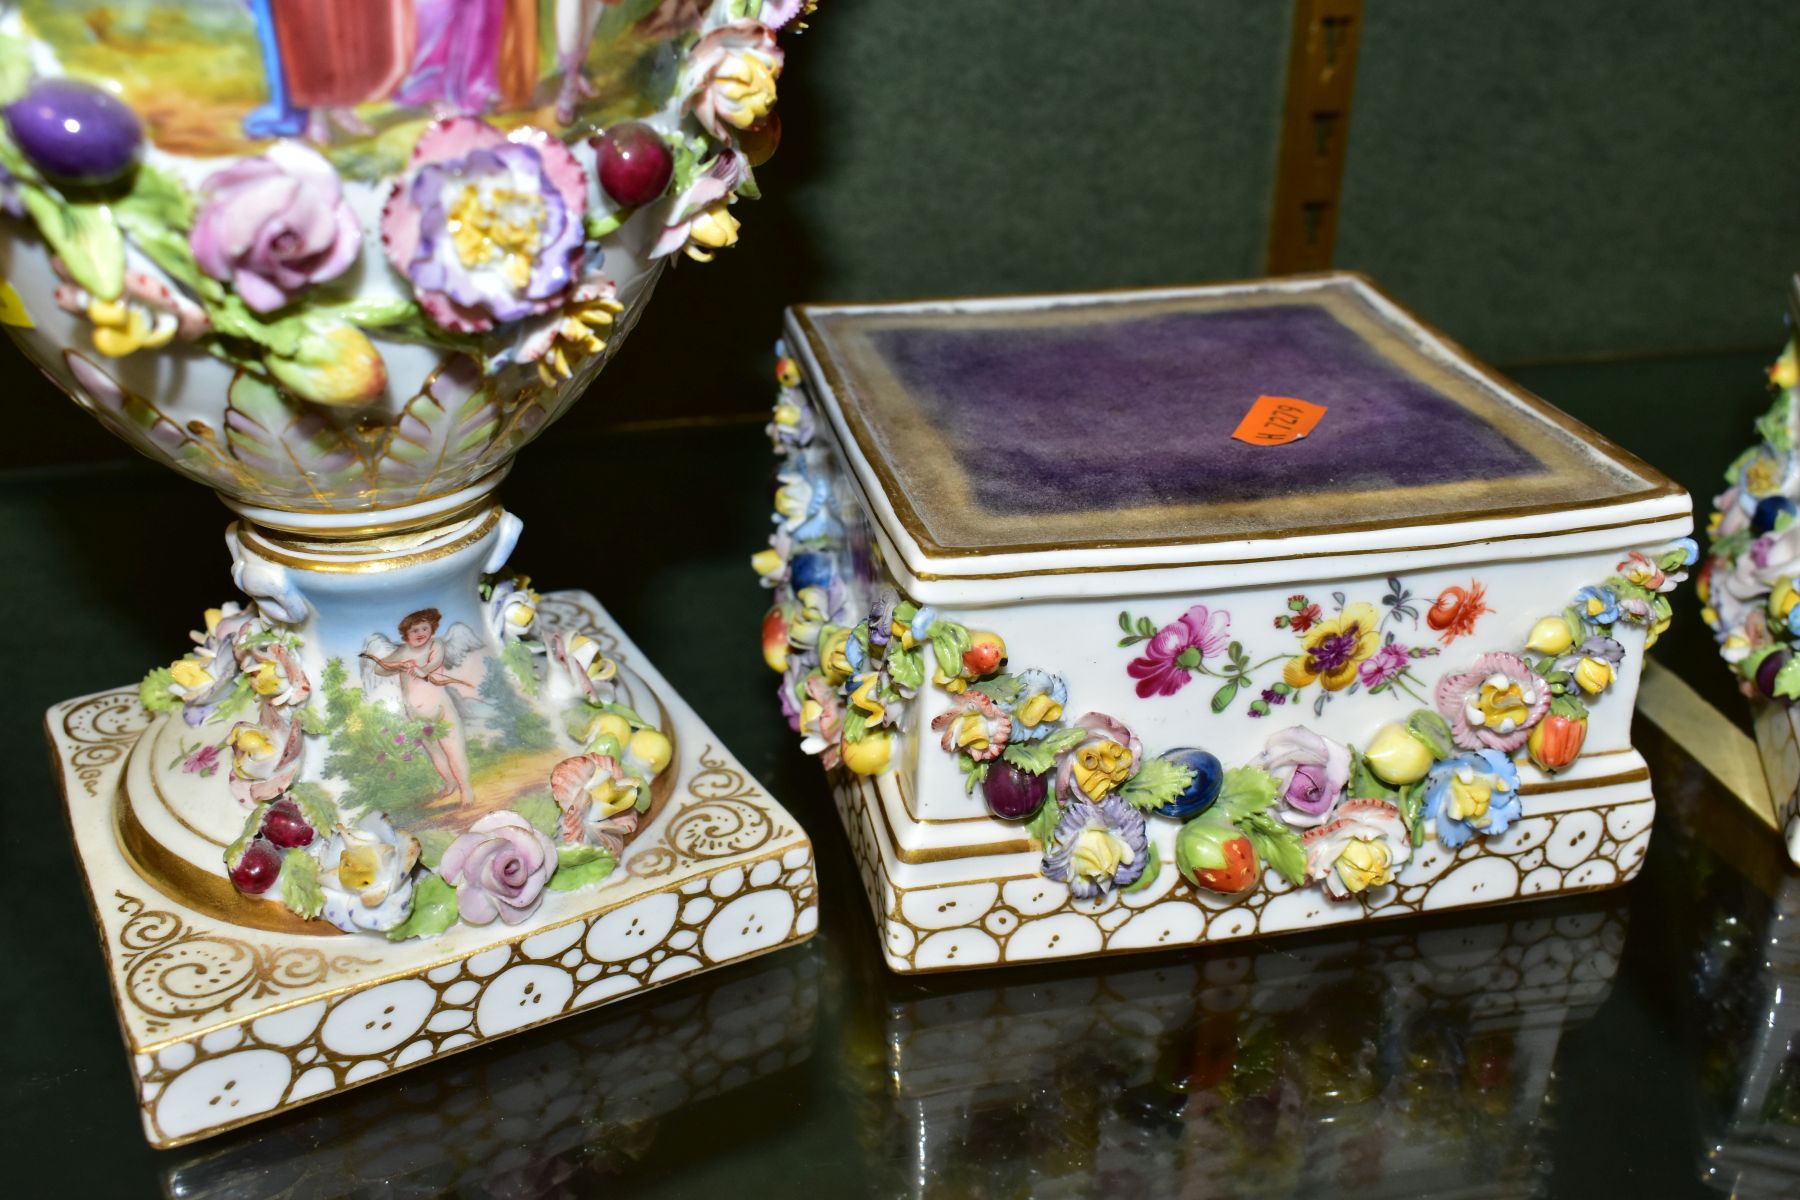 A PAIR OF EARLY 20TH CENTURY POTSCHAPPEL PORCELAIN TWIN HANDLED FLORAL ENCRUSTED VASES ON PLINTHS, - Image 19 of 20